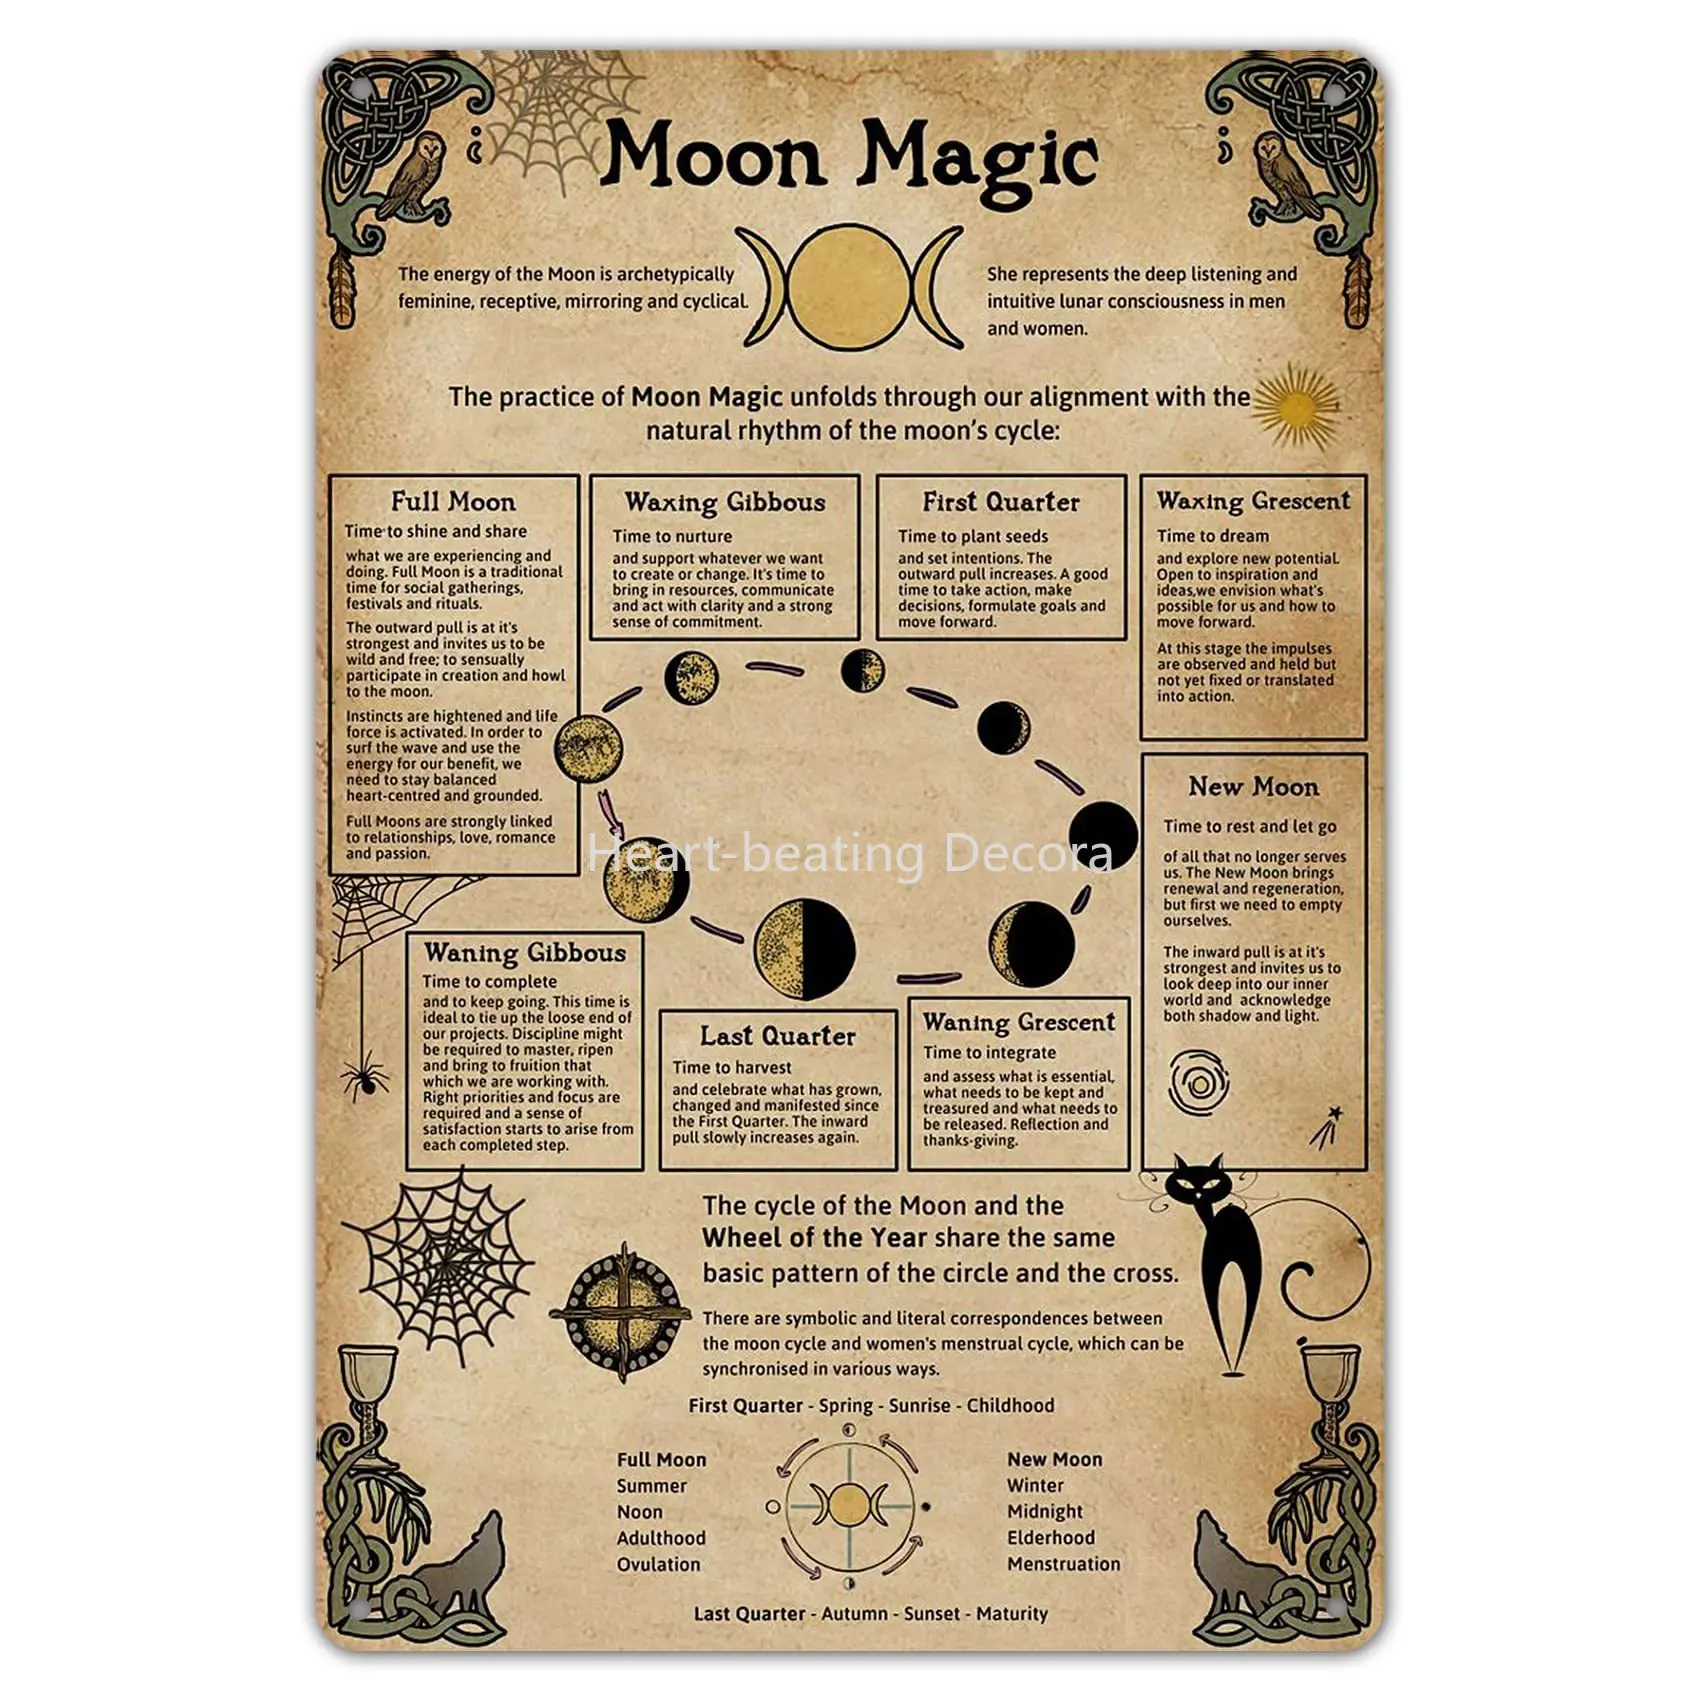 Moon Magic Knowledge Metal Tin Planning Infographic Poster Plaque for School Education Club Home Wall Decor Wall Decor Metal music knowledge metal tin signs club decor music theory guide poster room home office wall decoration plaque 8x12 inches